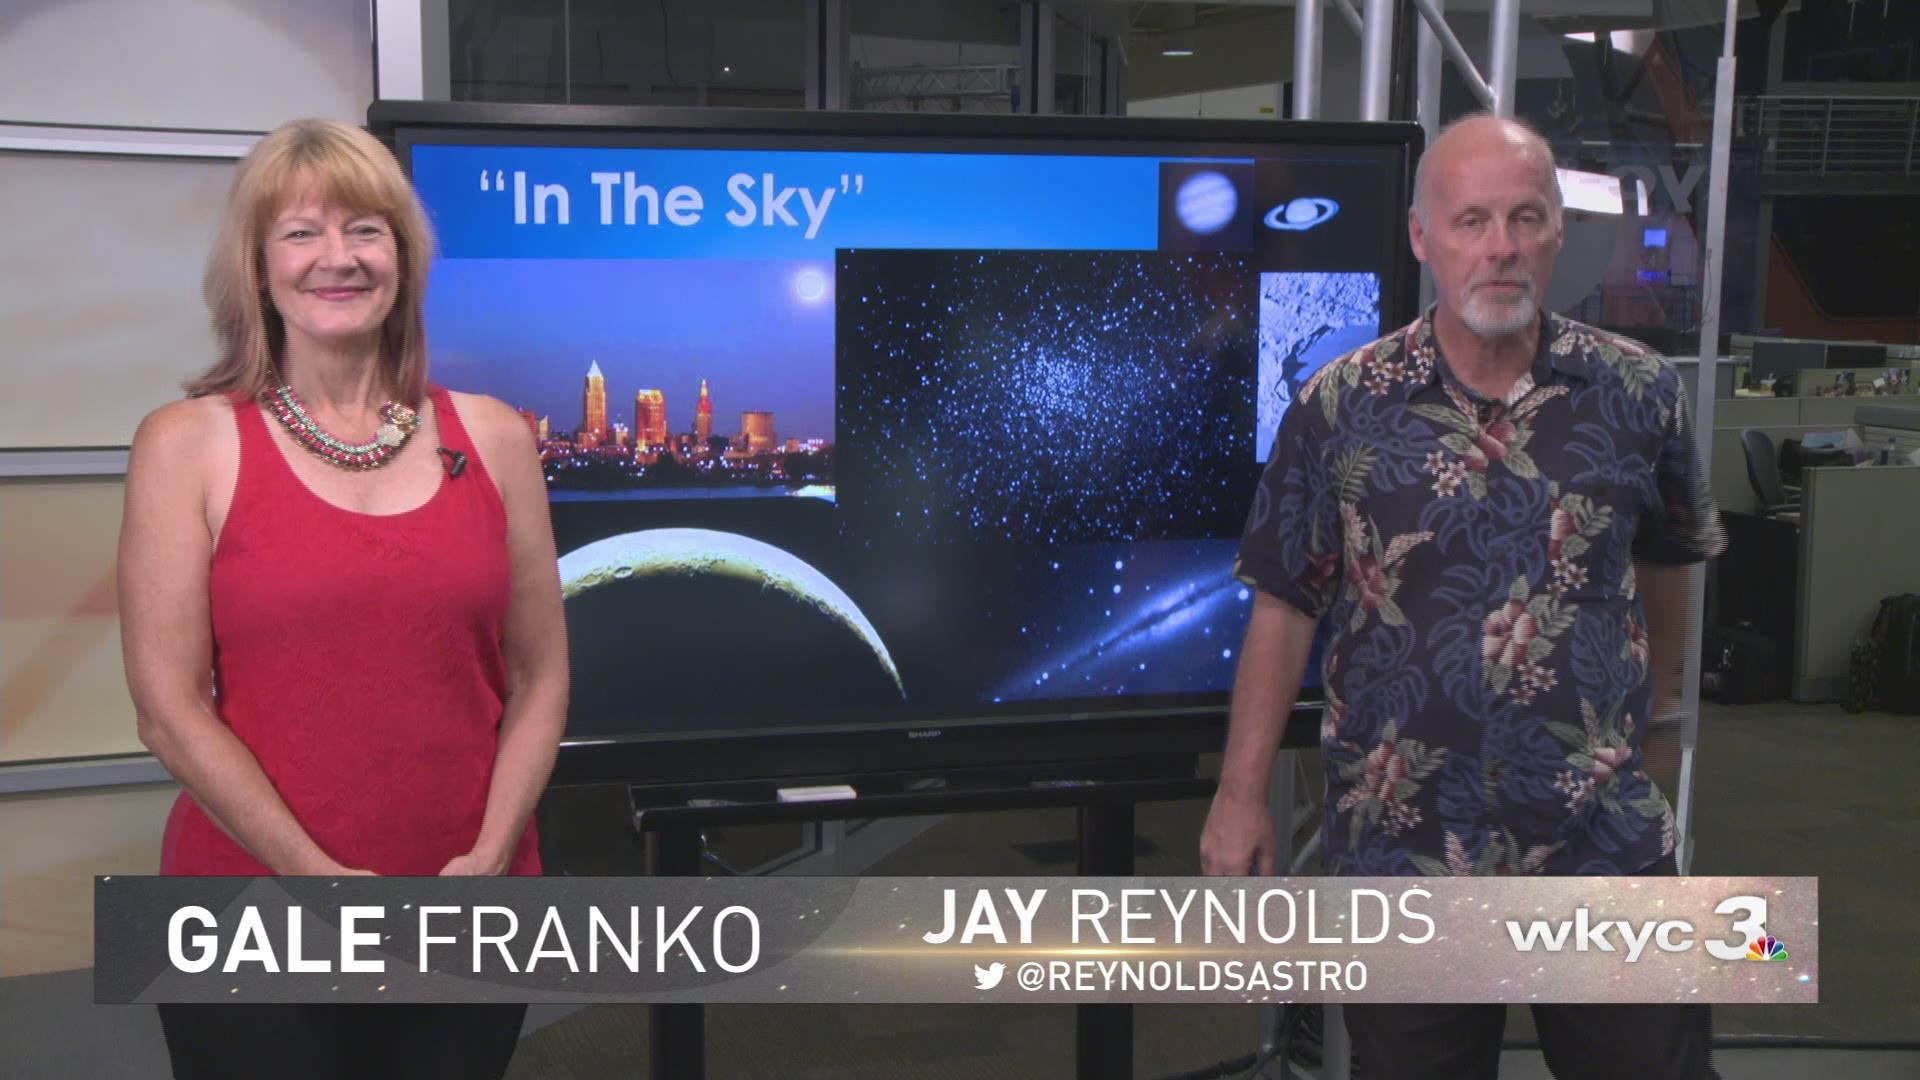 It's a new month and that means new things to view "In the Sky" with CSU research astronomer Jay Reynolds and Gayle Franko from the Cuyahoga Astronomical Association. #3weather